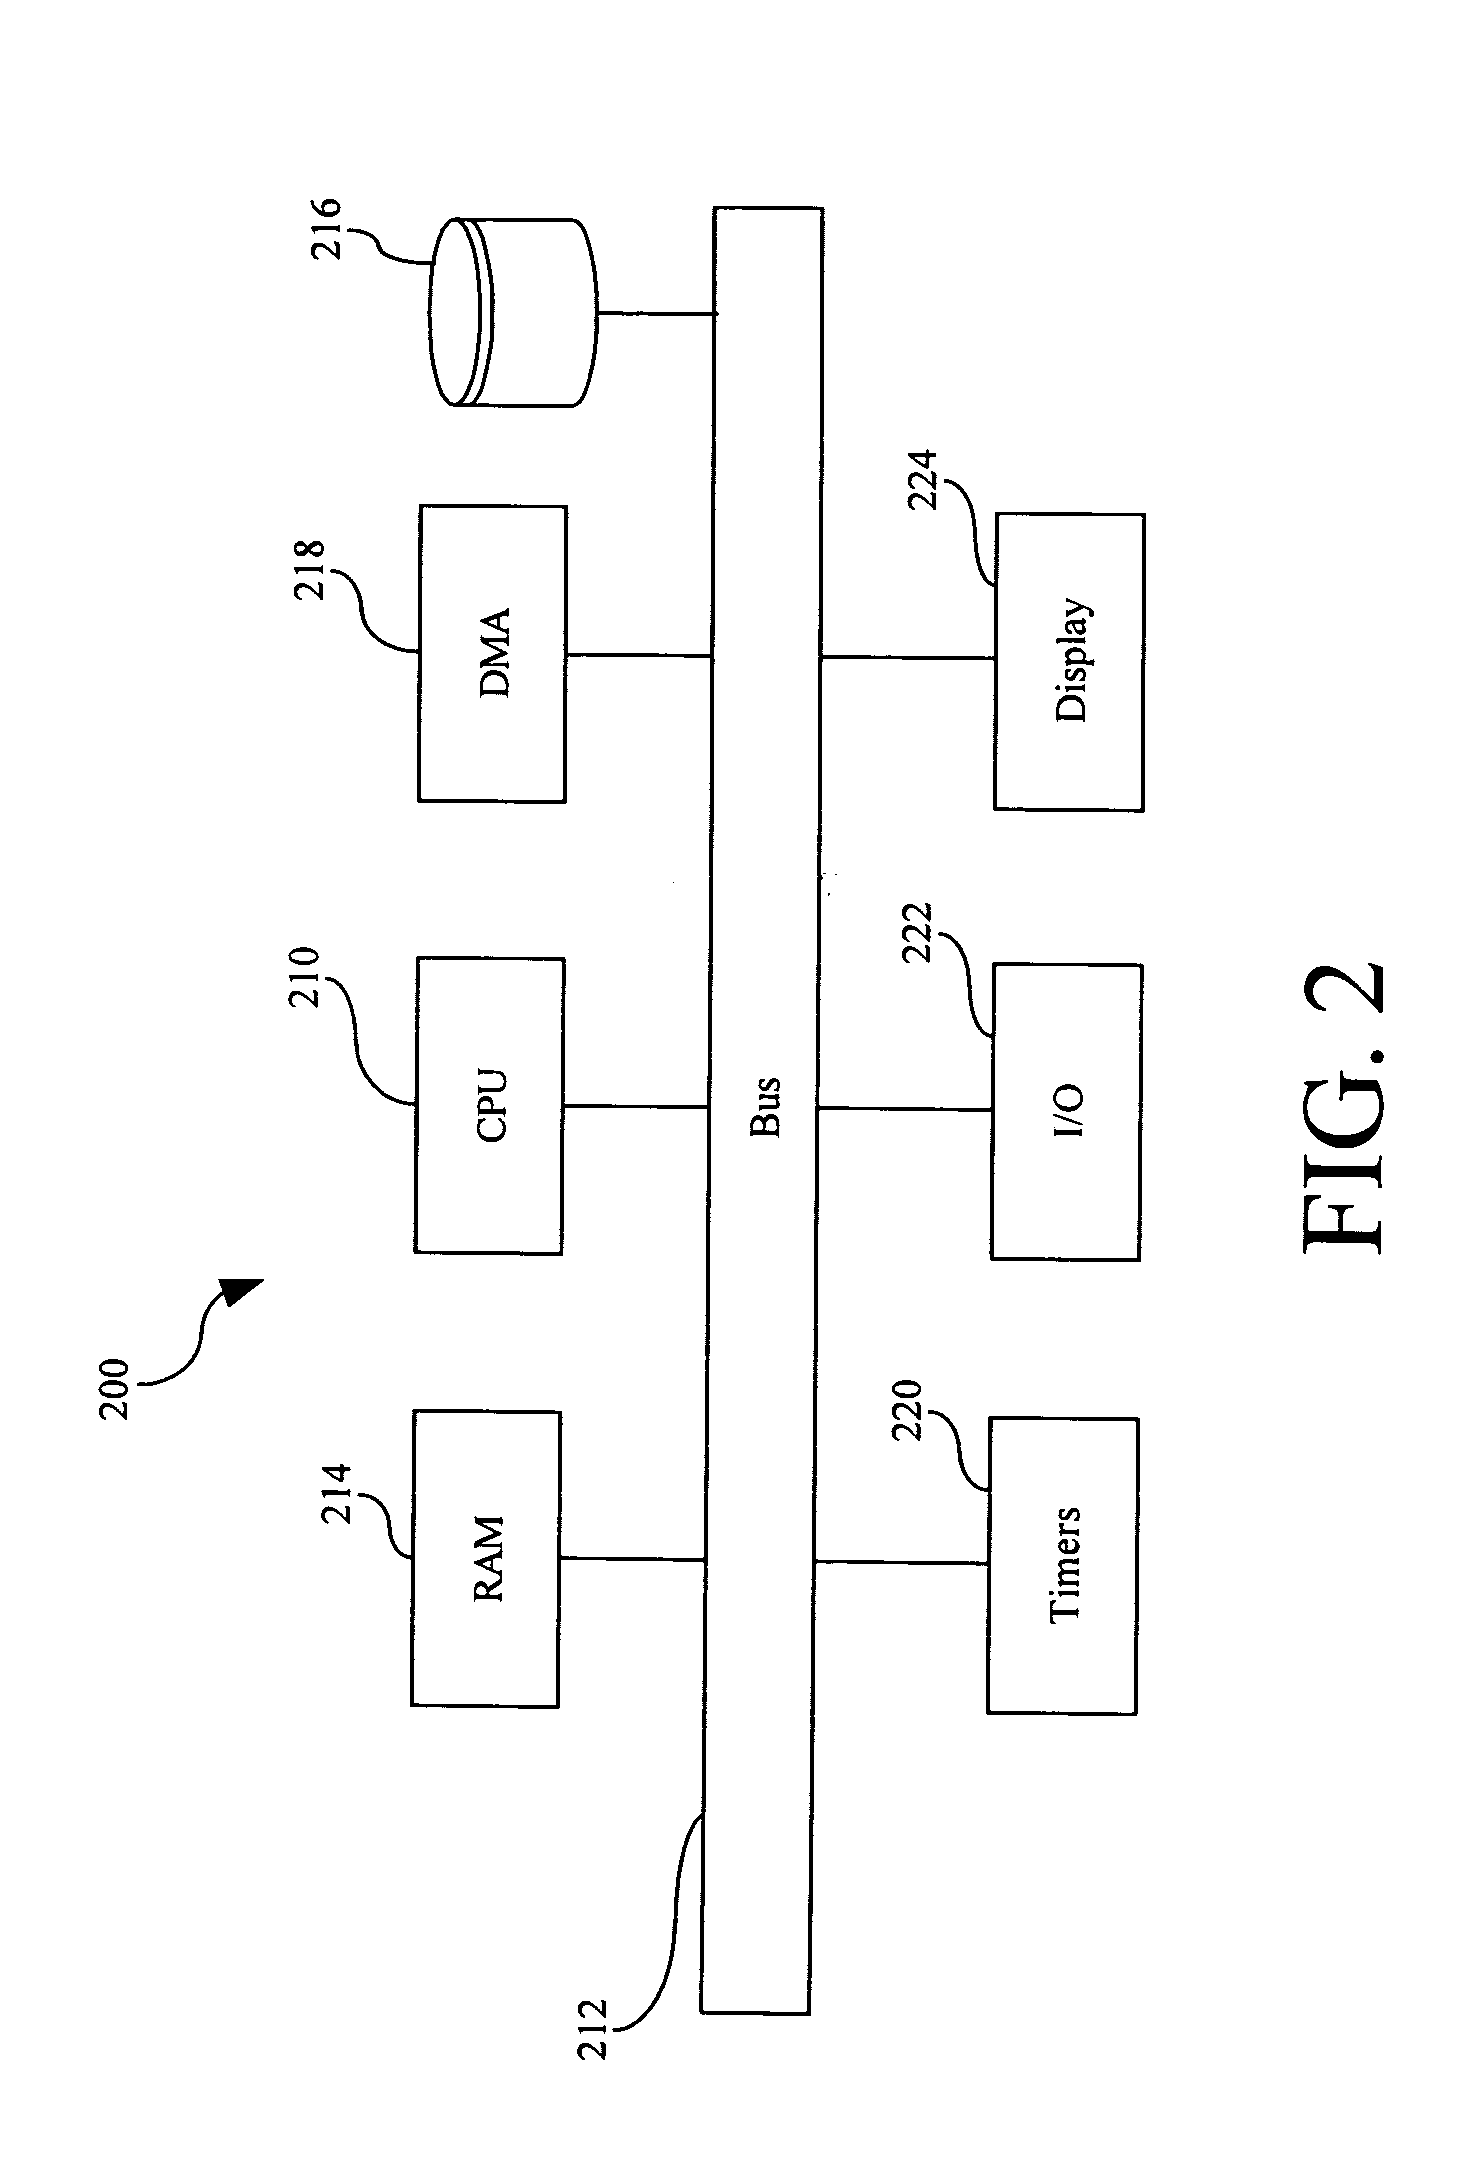 Apparatus and method for intra-cell delay time analysis